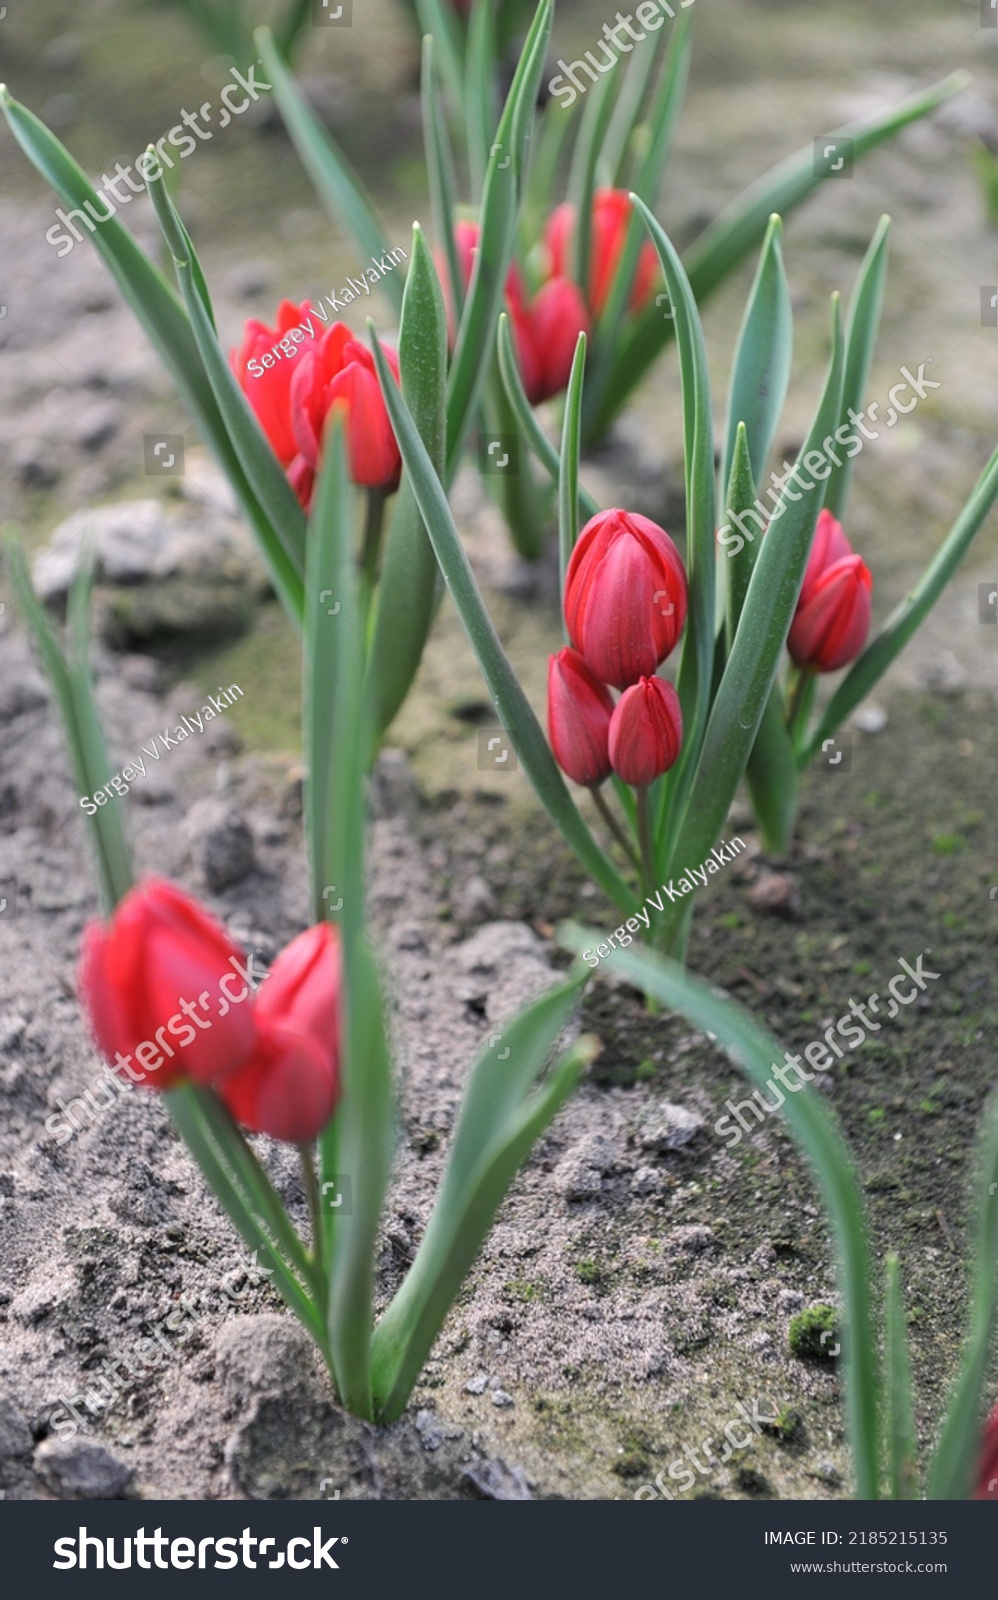 Red Miscellaneous tulips (Tulipa humilis) Heaven bloom in a garden in April #2185215135